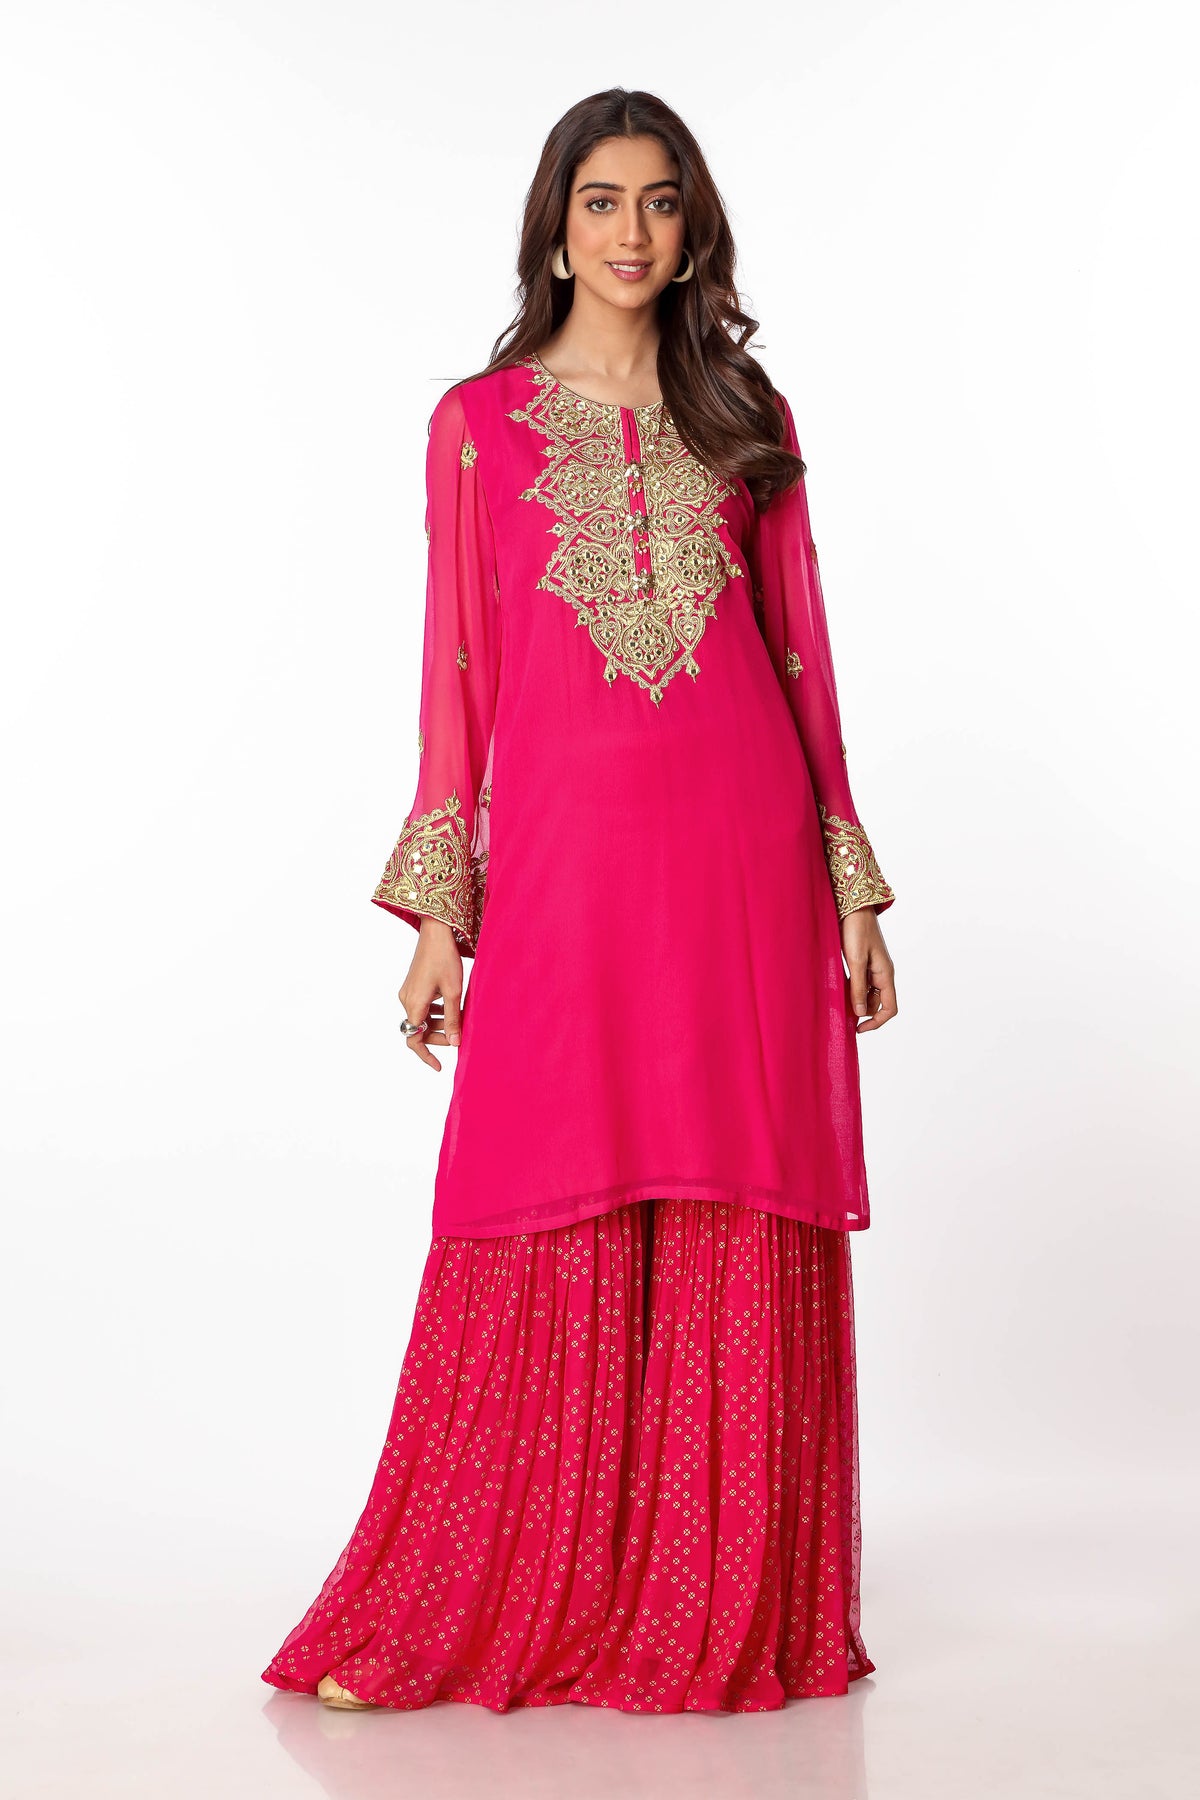 Discover Timeless Style: Sheesha Leaf Shirt in Pink Printed Lawn ...